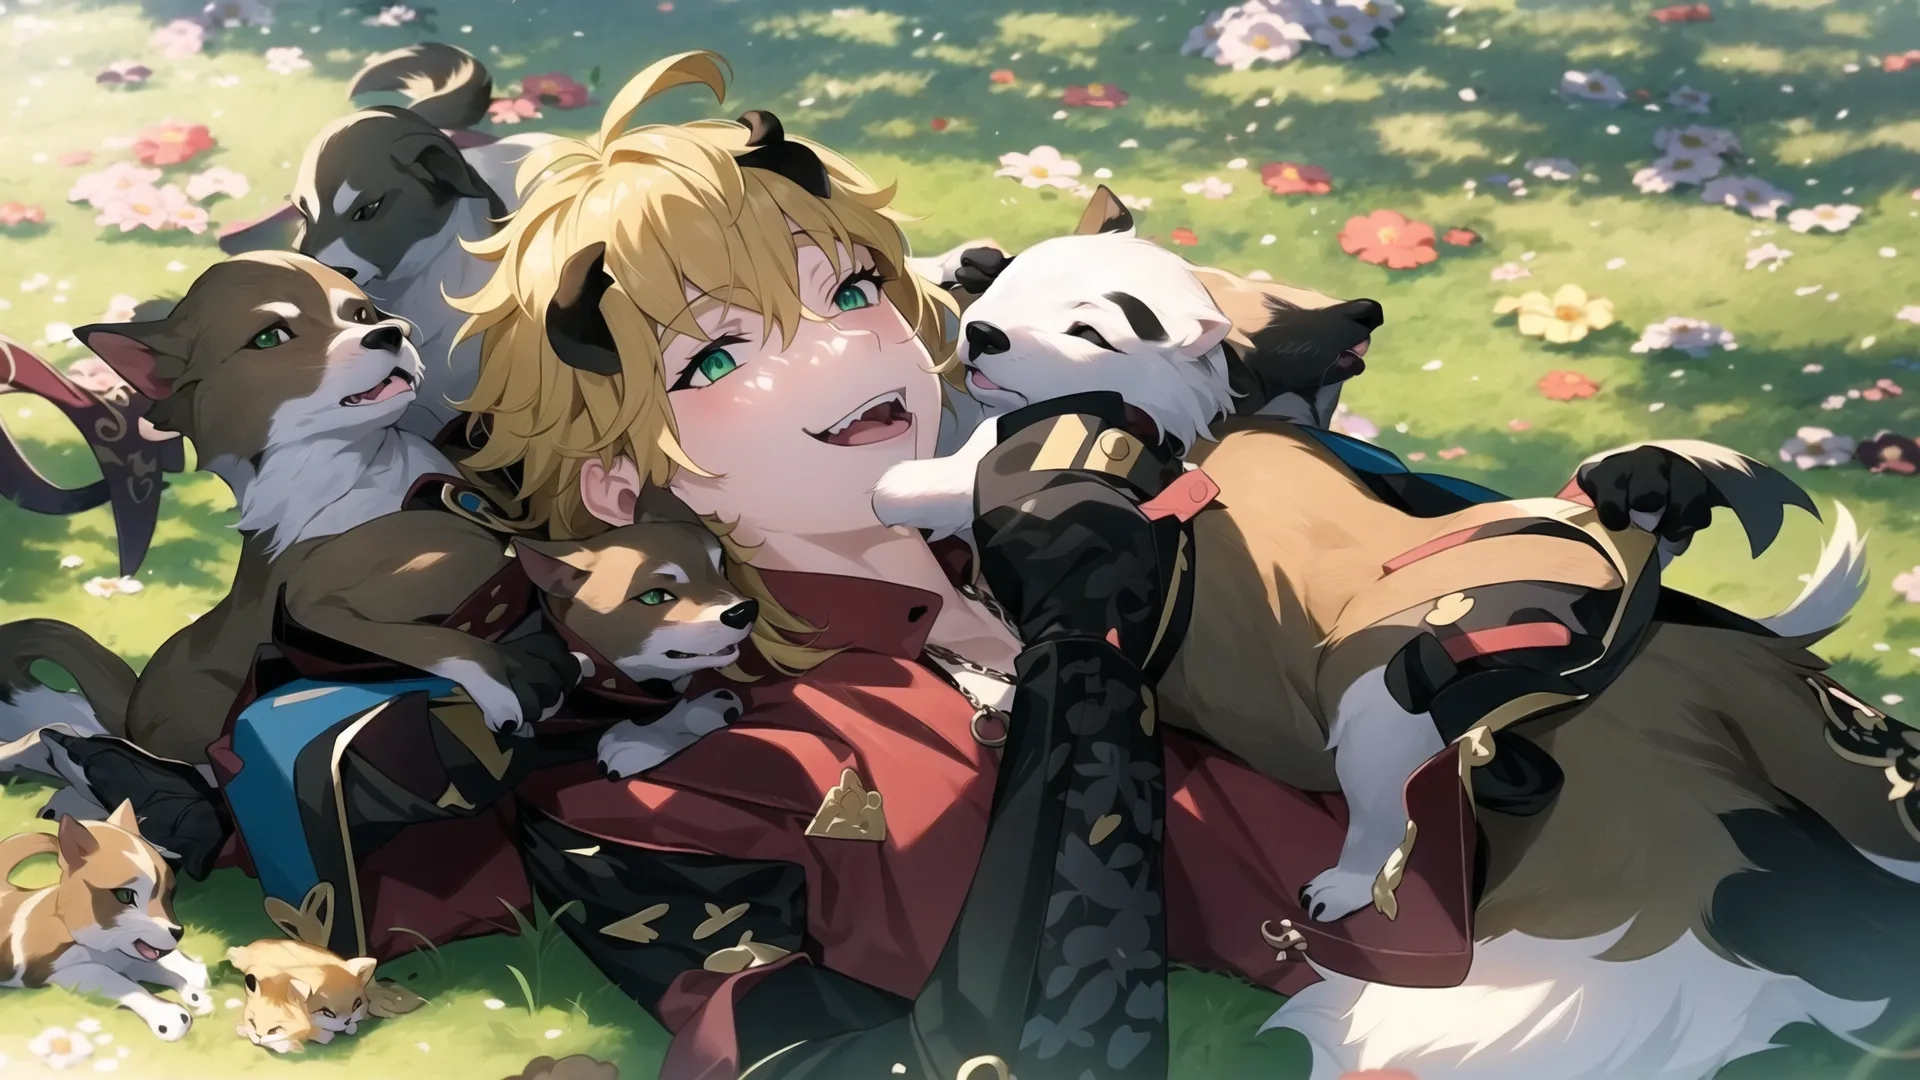 anime image, the cat lady with her dog babies and puppies relaxing on the grass with wild flowers in the background, and many animals surrounding
